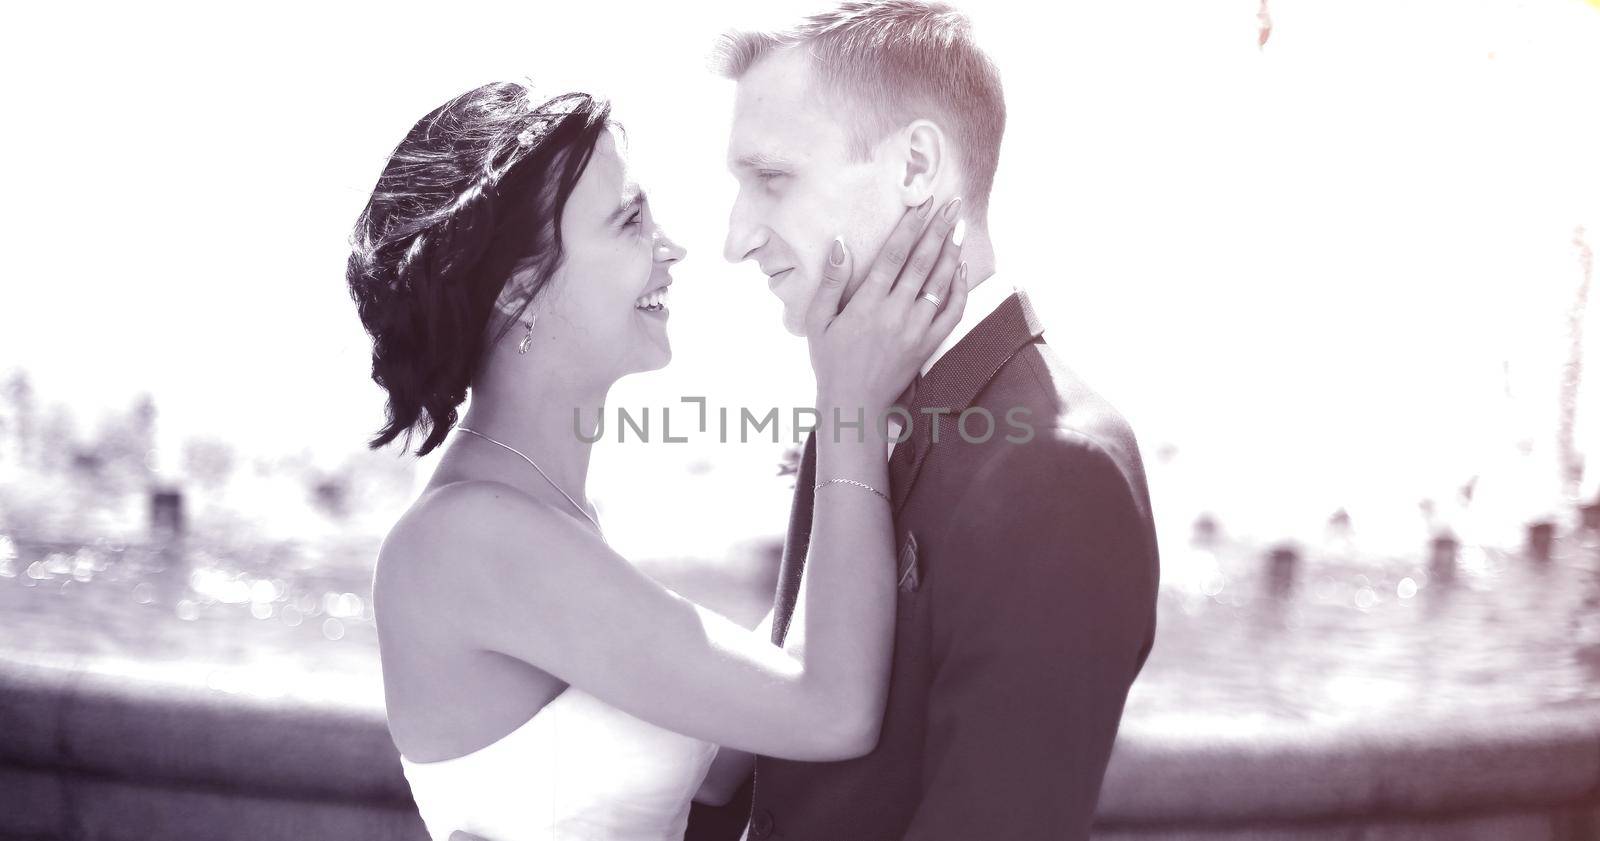 photo in retro.closeup portrait of bride and groom by SmartPhotoLab